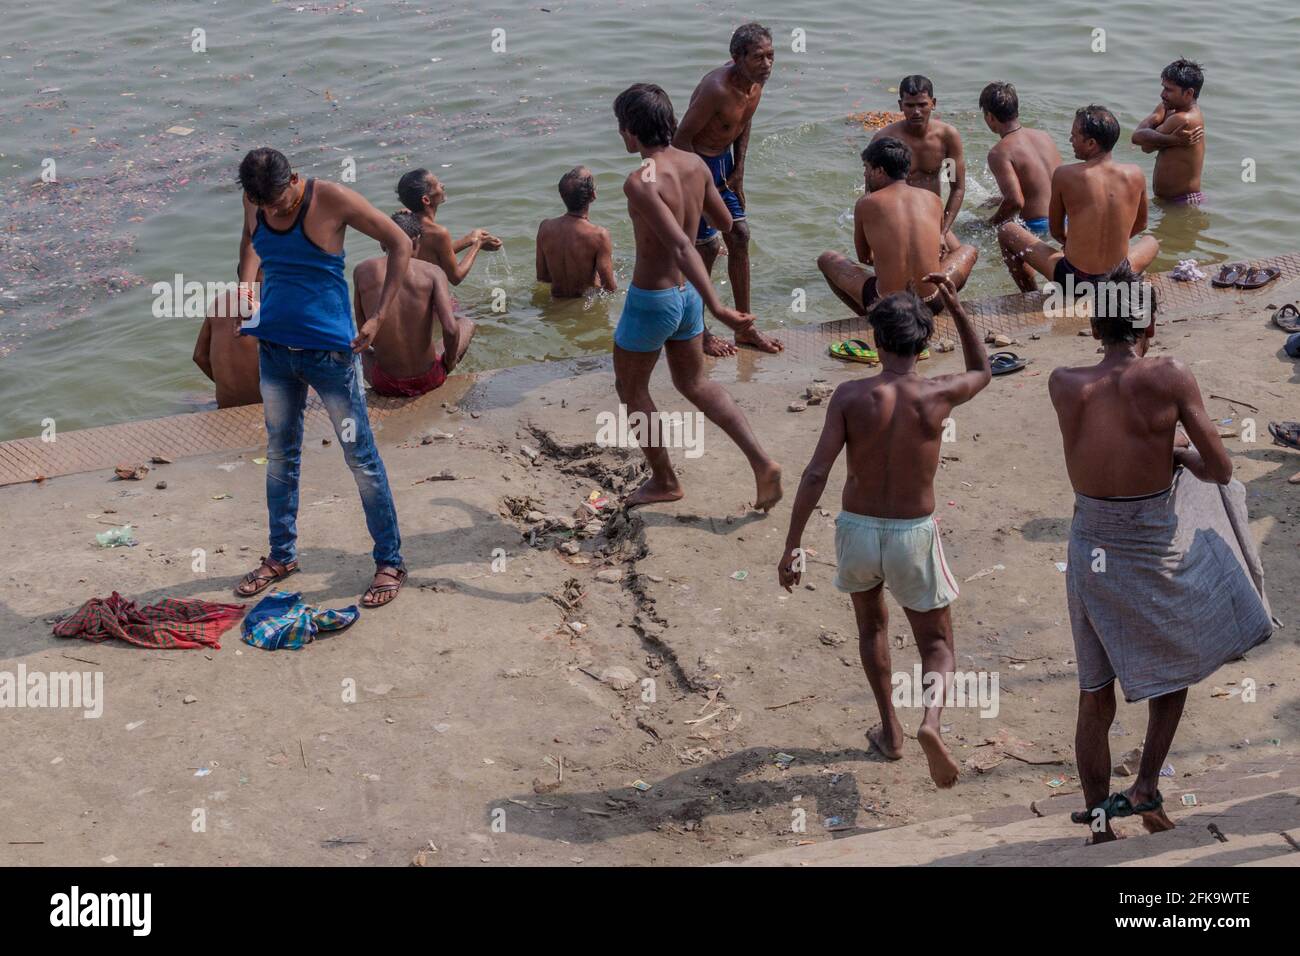 VARANASI, INDIA - OCTOBER 25, 2016: Local people wash themself in sacred water of Ganges rover at a Ghat riverfront steps in Varanasi, India Stock Photo